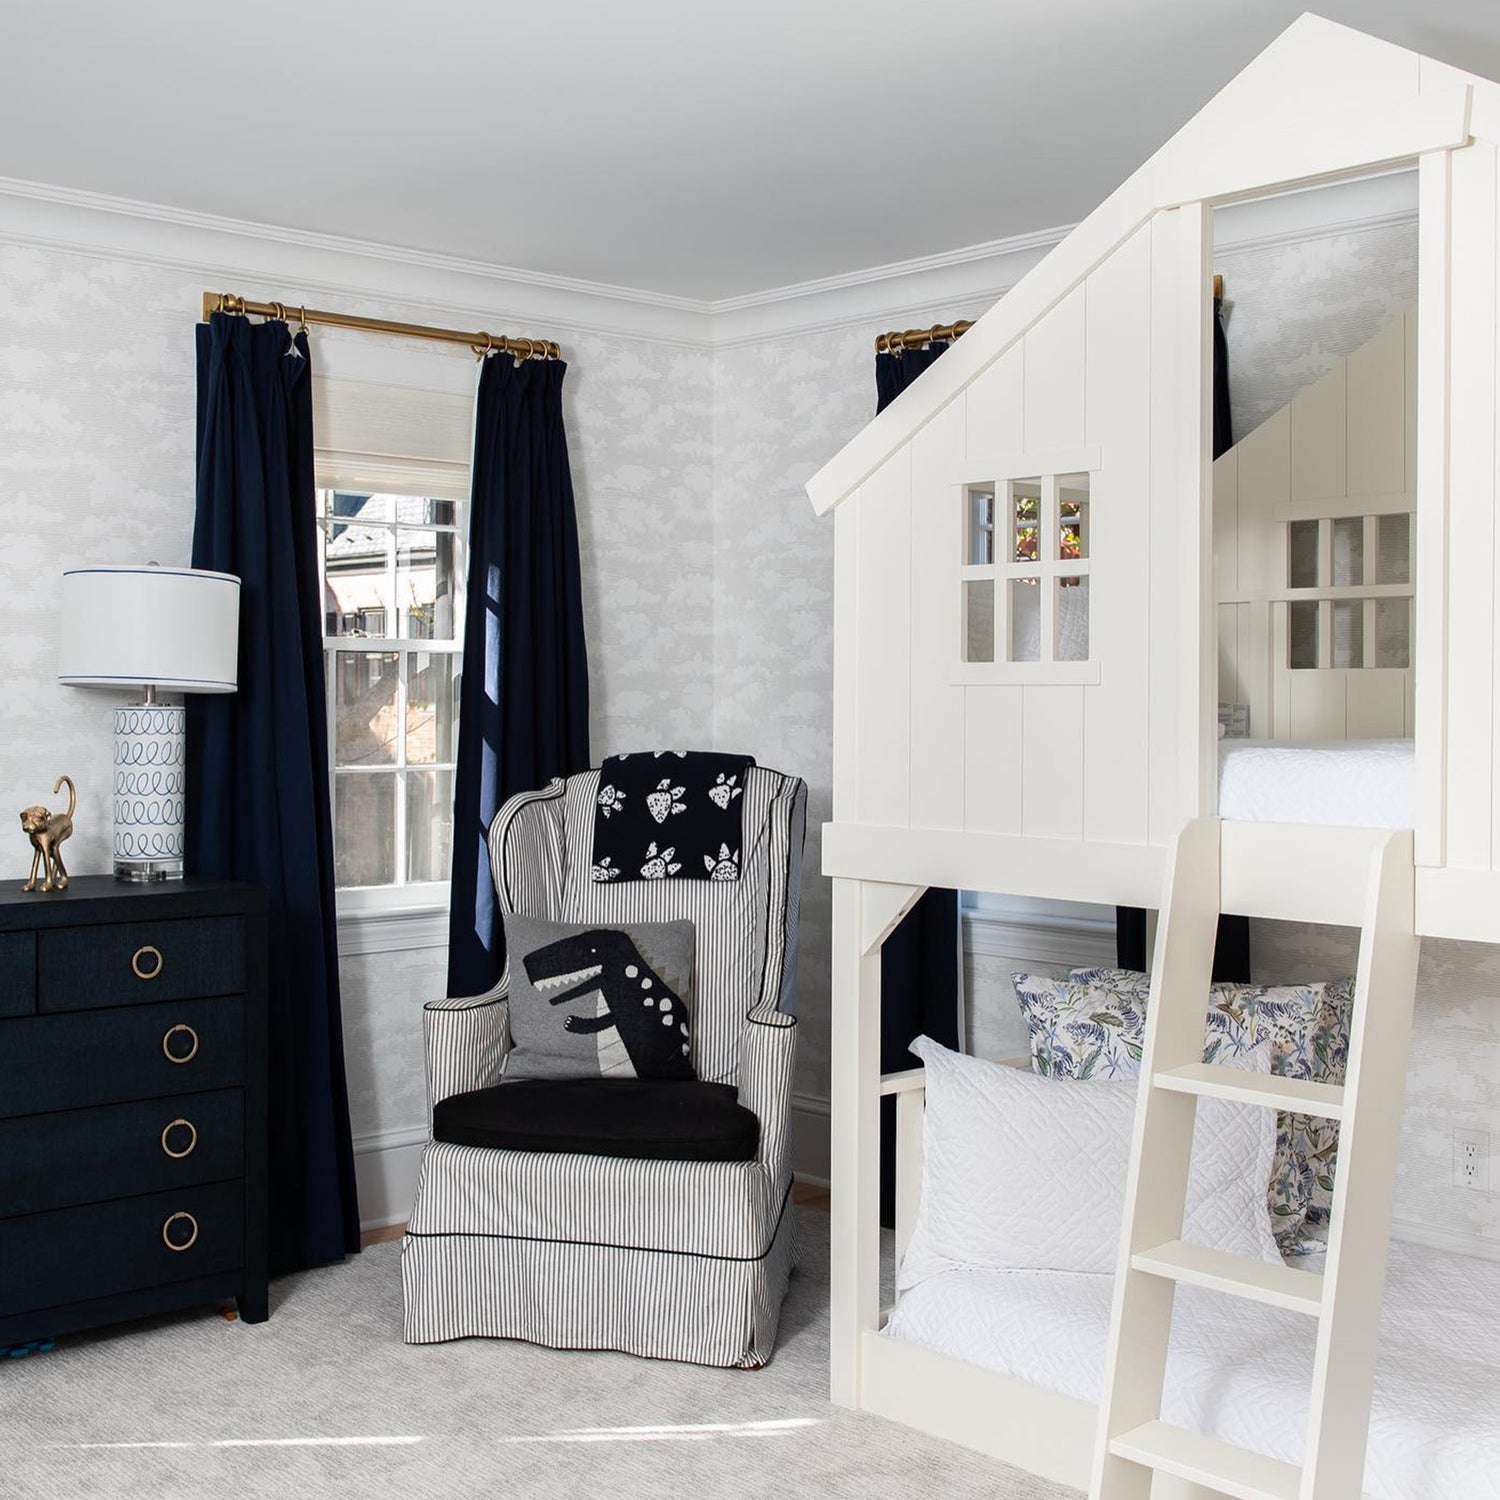 Children's bedroom styled with Navy Blue Curtains on two windows in front of white house bed with Blue With Intricate Tiger Design Printed pillows by striped sofa chair with dinosaur printed pillow and navy blue dresser next to it